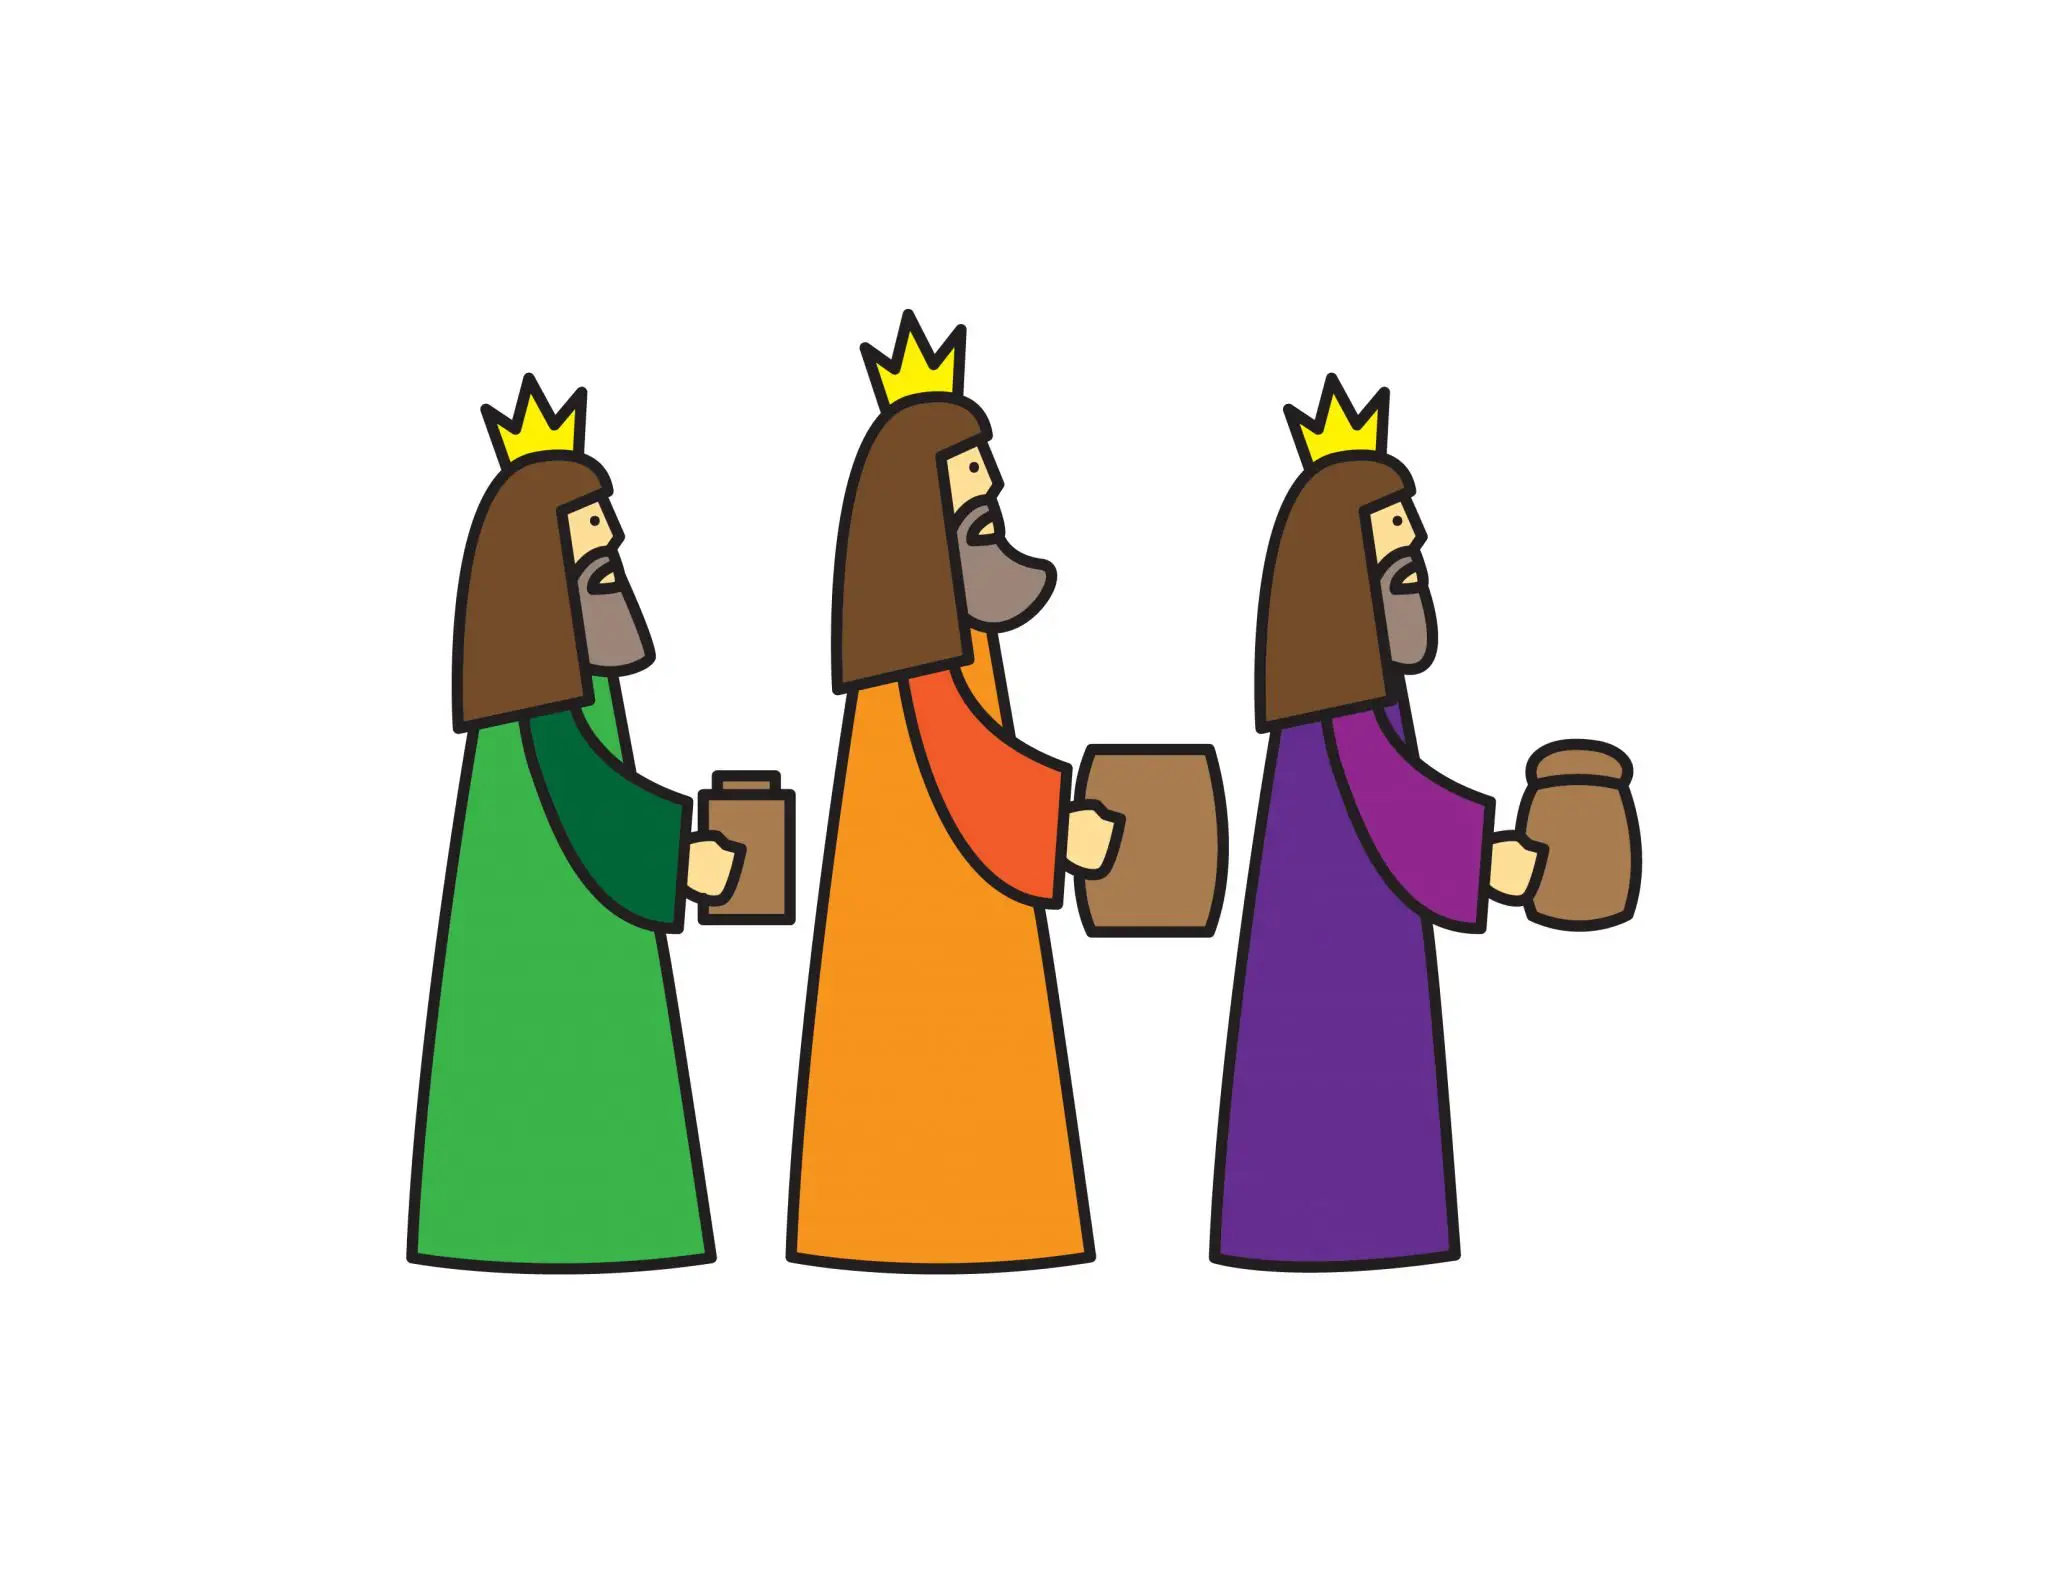 How To Draw The Three Wise Men (Easy Tutorial for Kids) Rainbow